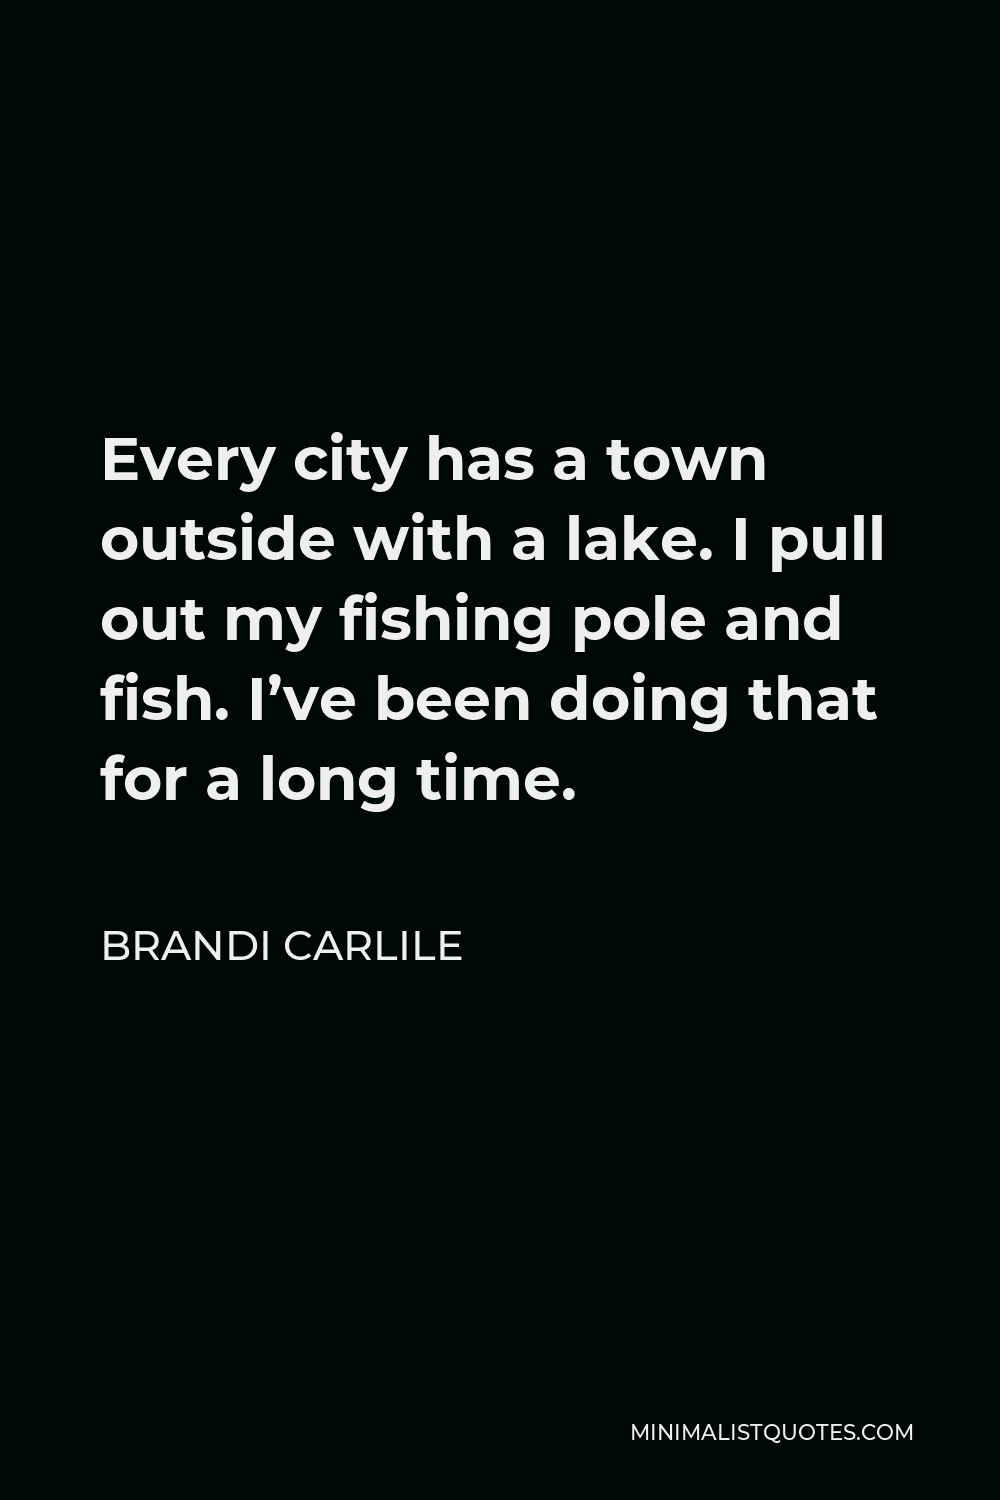 Brandi Carlile Quote - Every city has a town outside with a lake. I pull out my fishing pole and fish. I’ve been doing that for a long time.